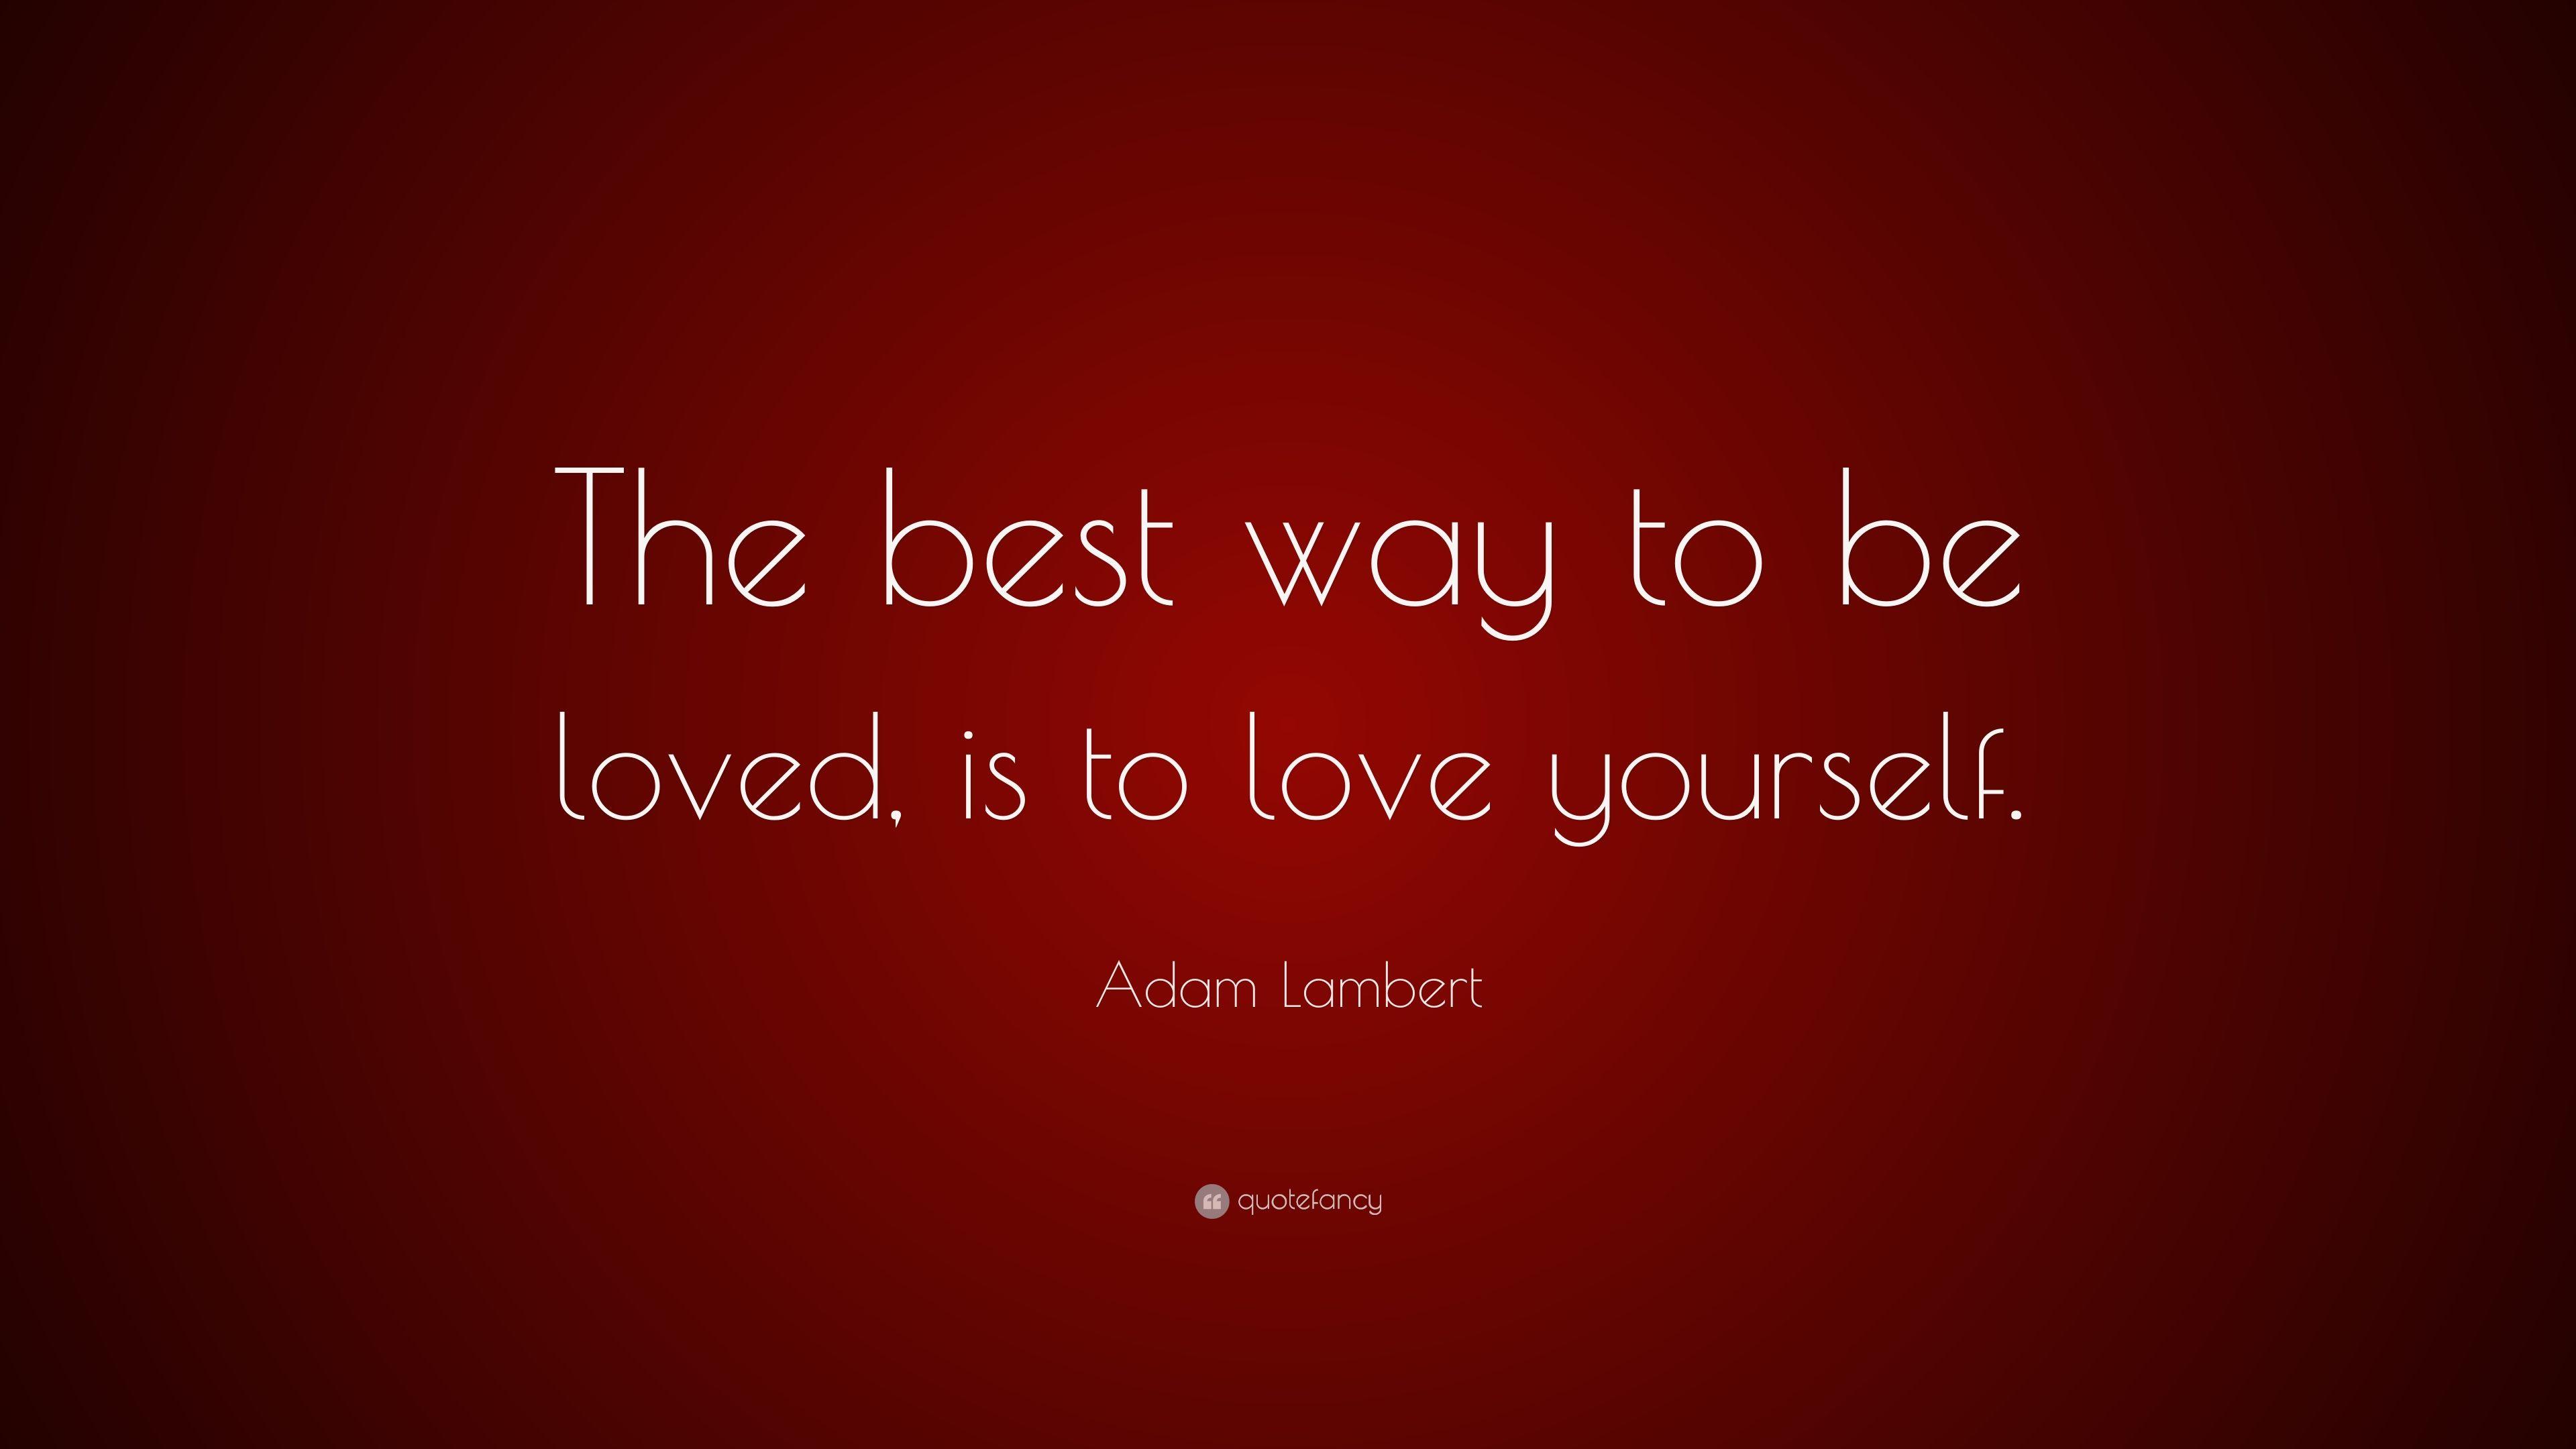 Adam Lambert Quote: “The best way to be loved, is to love yourself